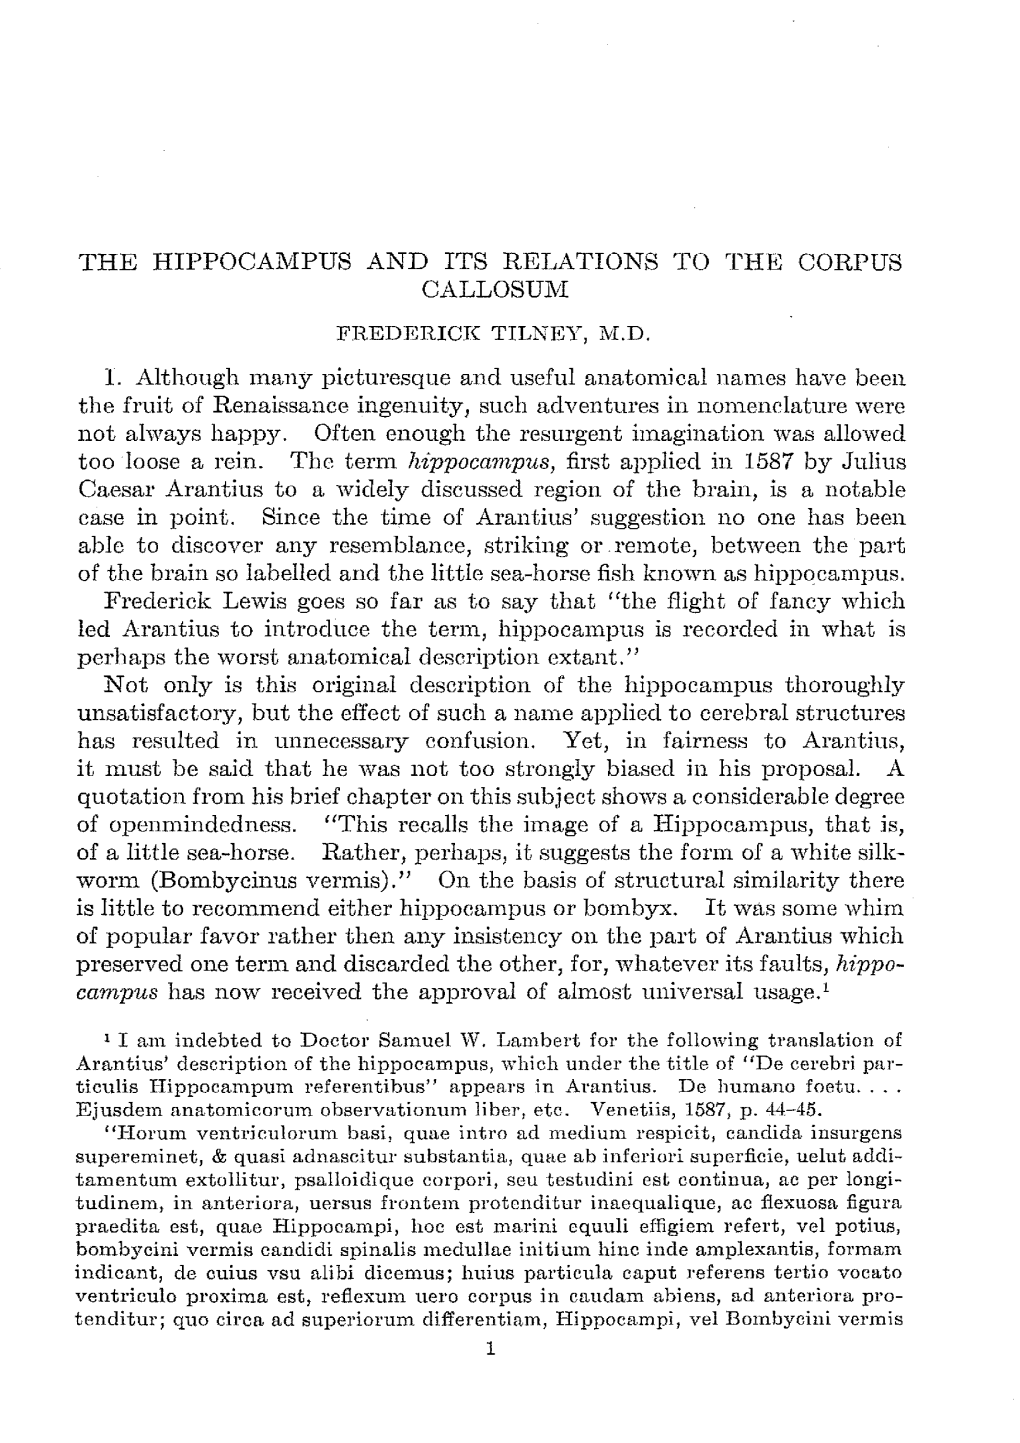 The Hippocampus and Its Relations to the Corpus Callosum Frederick Tilney, M.D